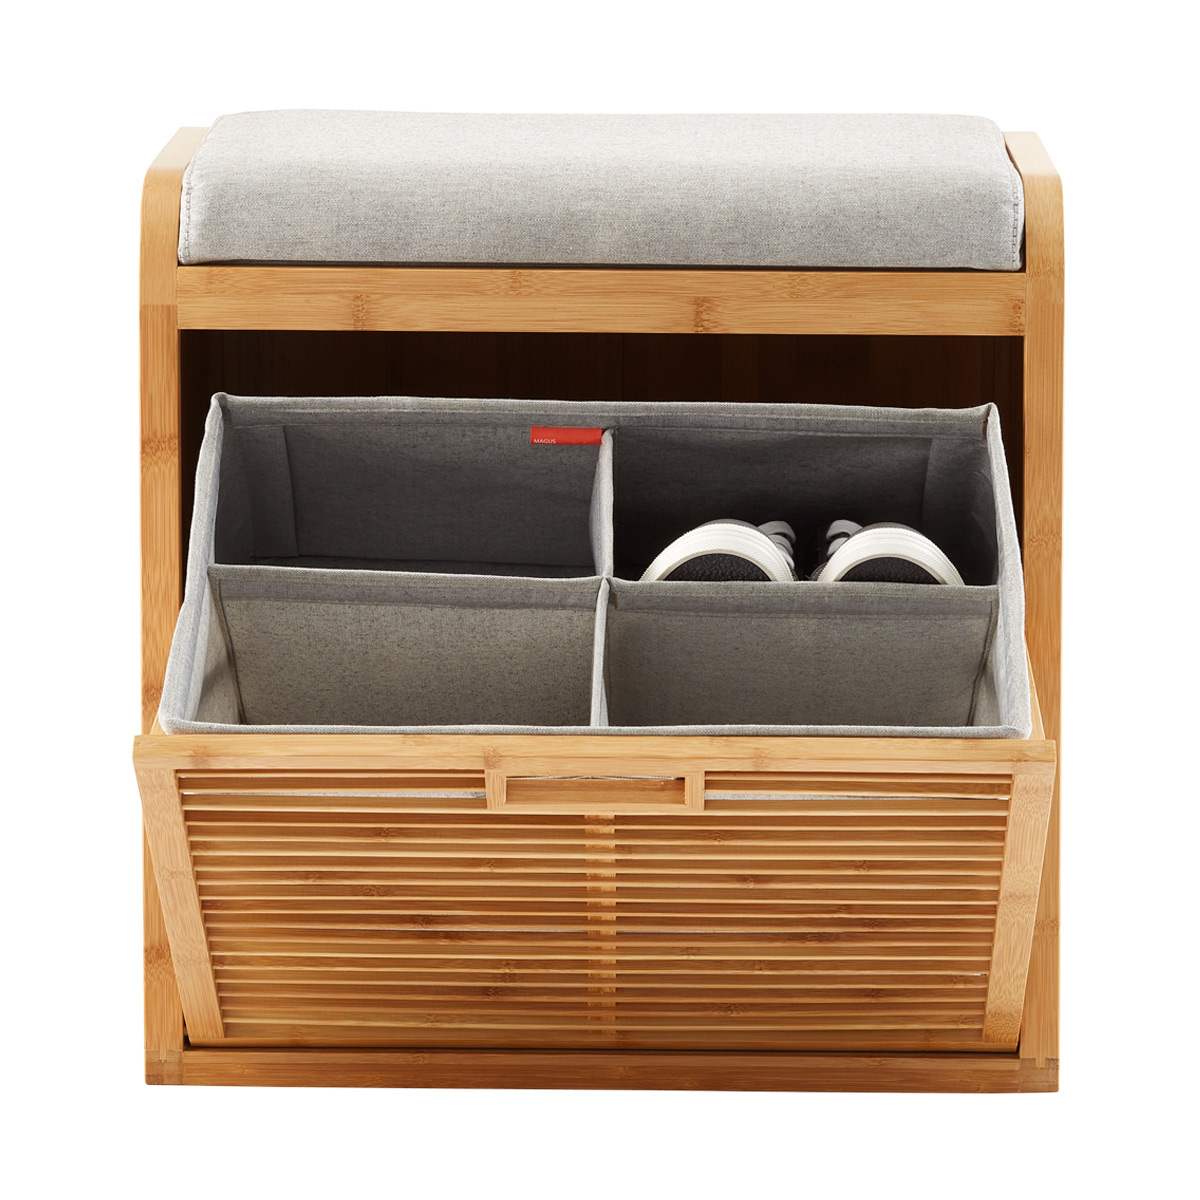 Lotus Bamboo Storage Bench | The Container Store